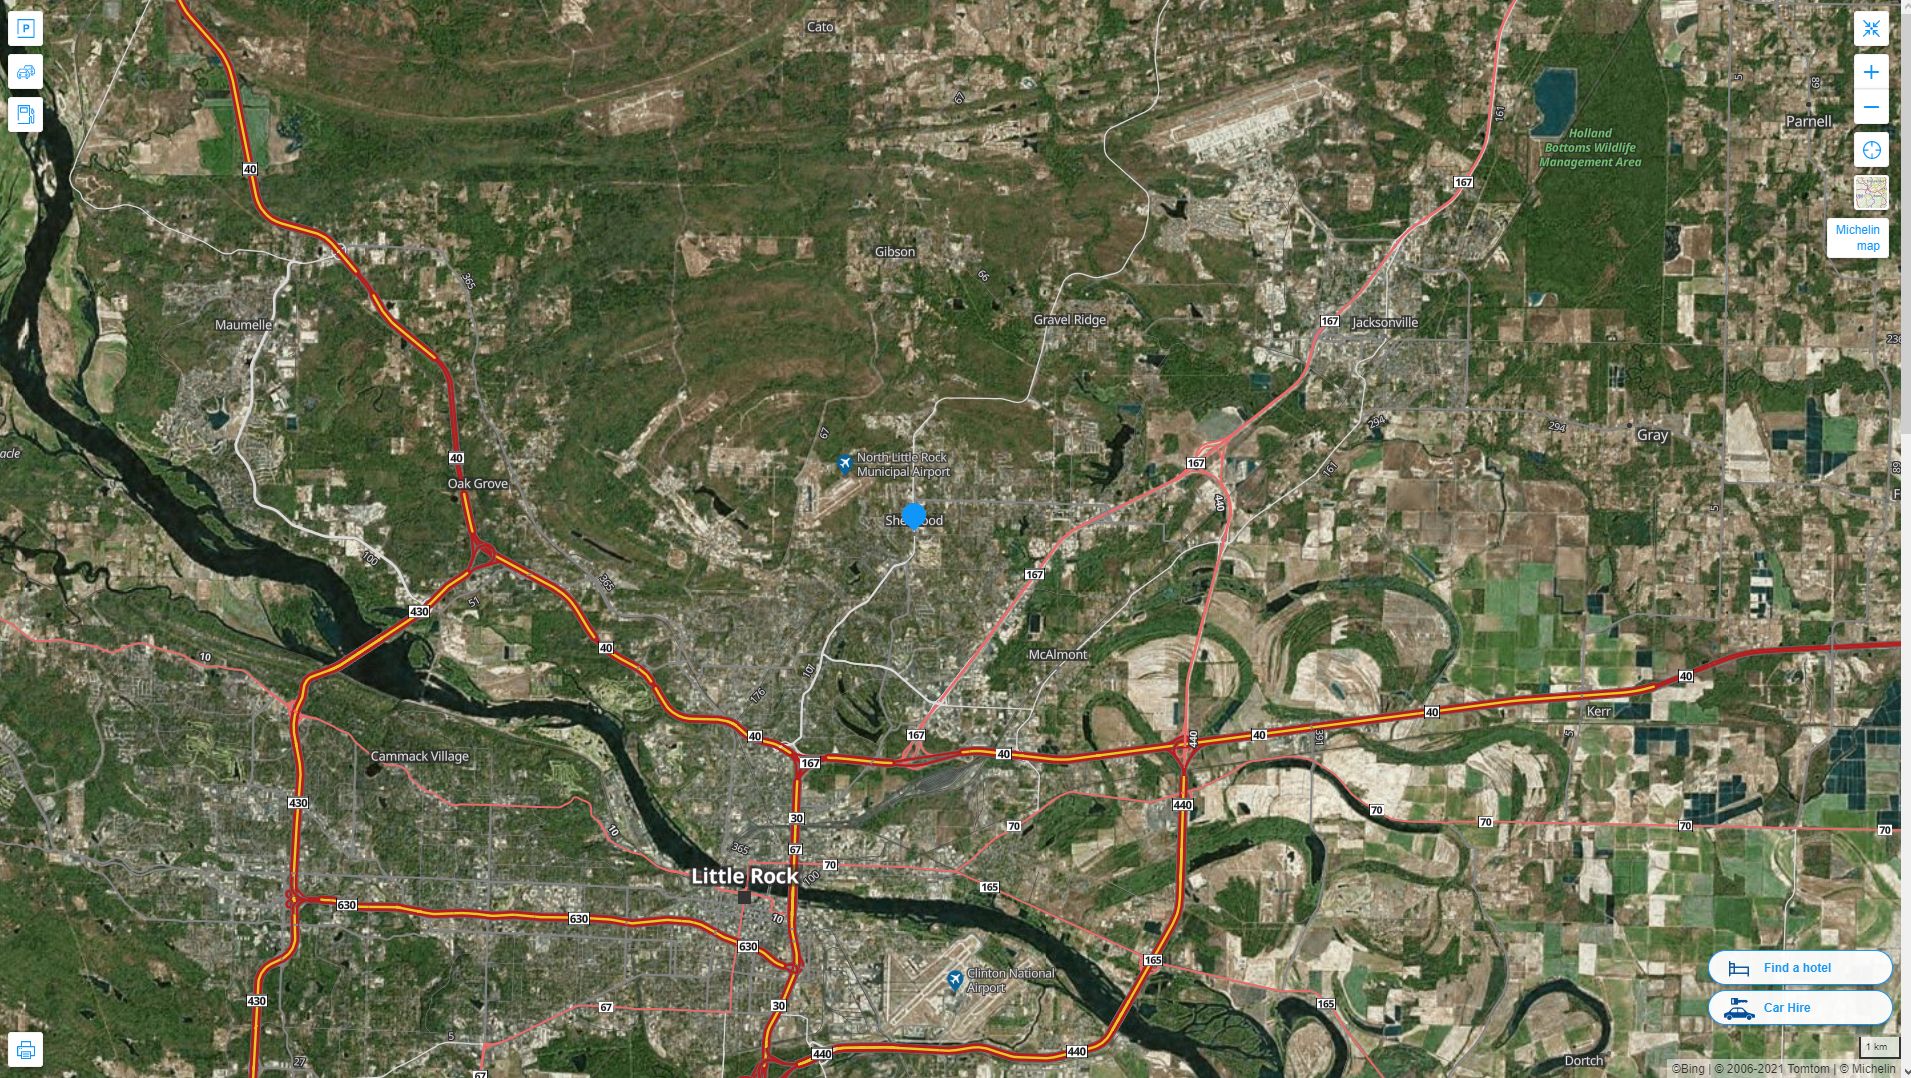 Sherwood Arkansas Highway and Road Map with Satellite View